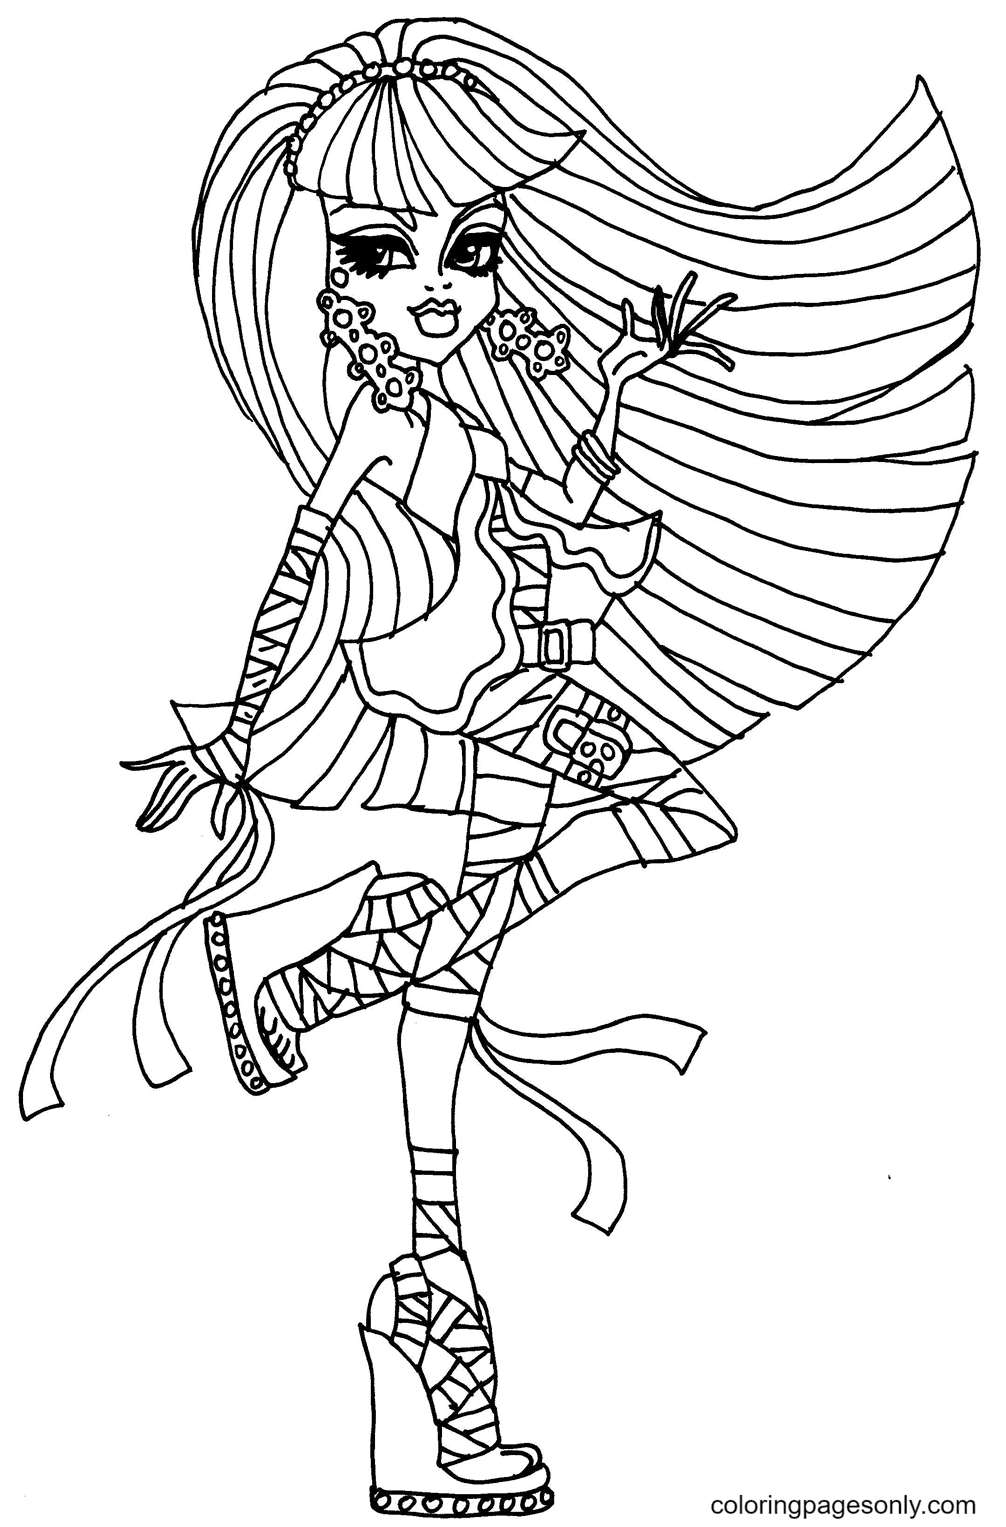 Monster High Cleo De Nile Coloring Pages